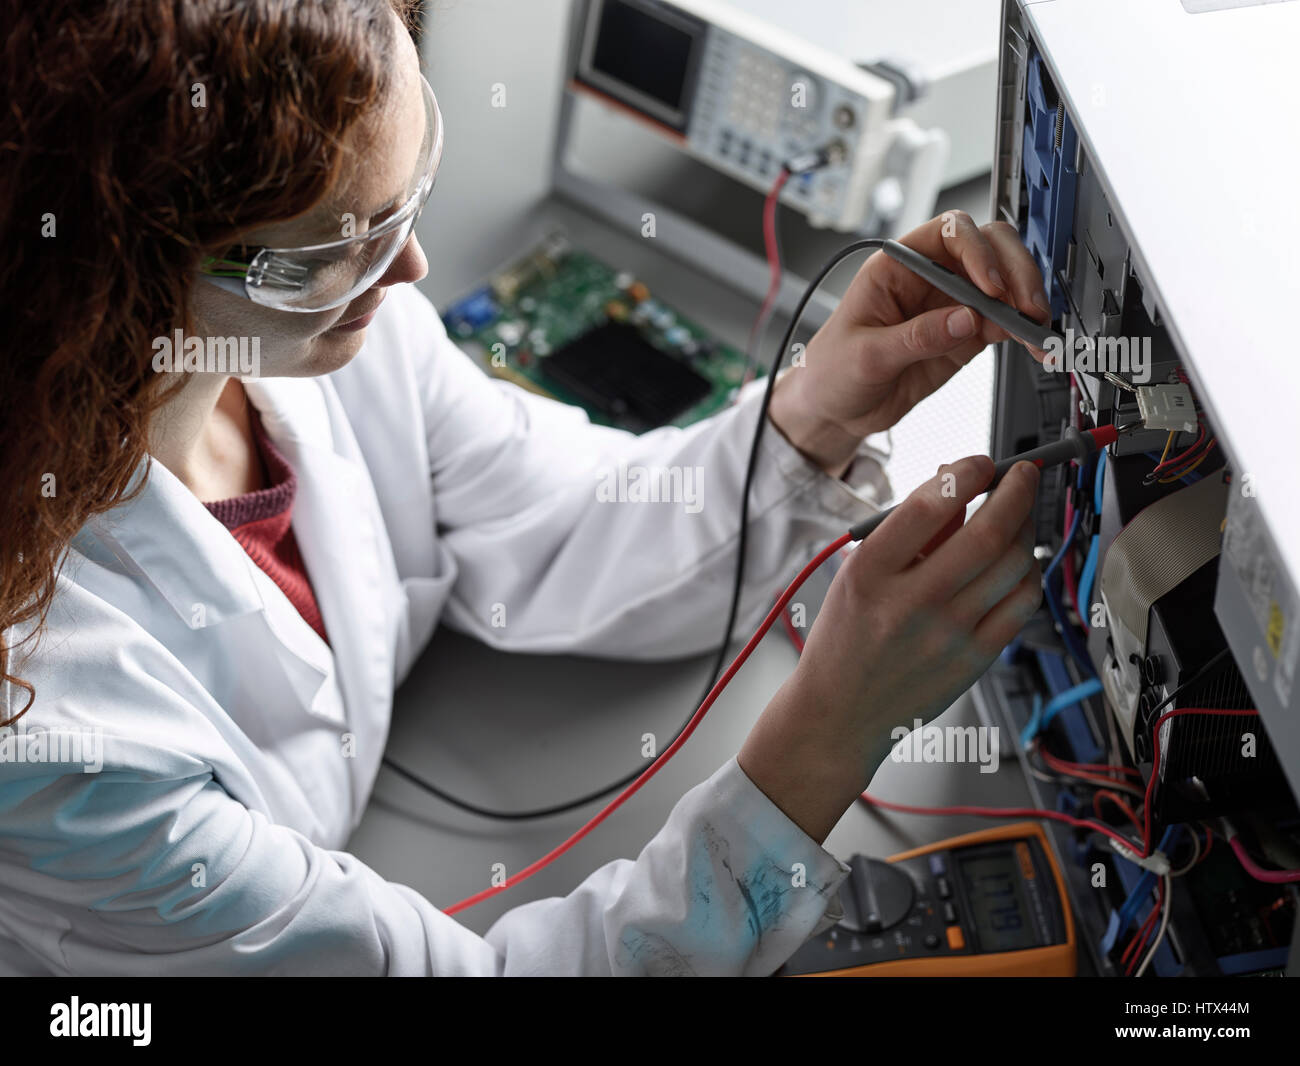 Engineer with white lab coat and goggles measures current with a meter, Austria Stock Photo